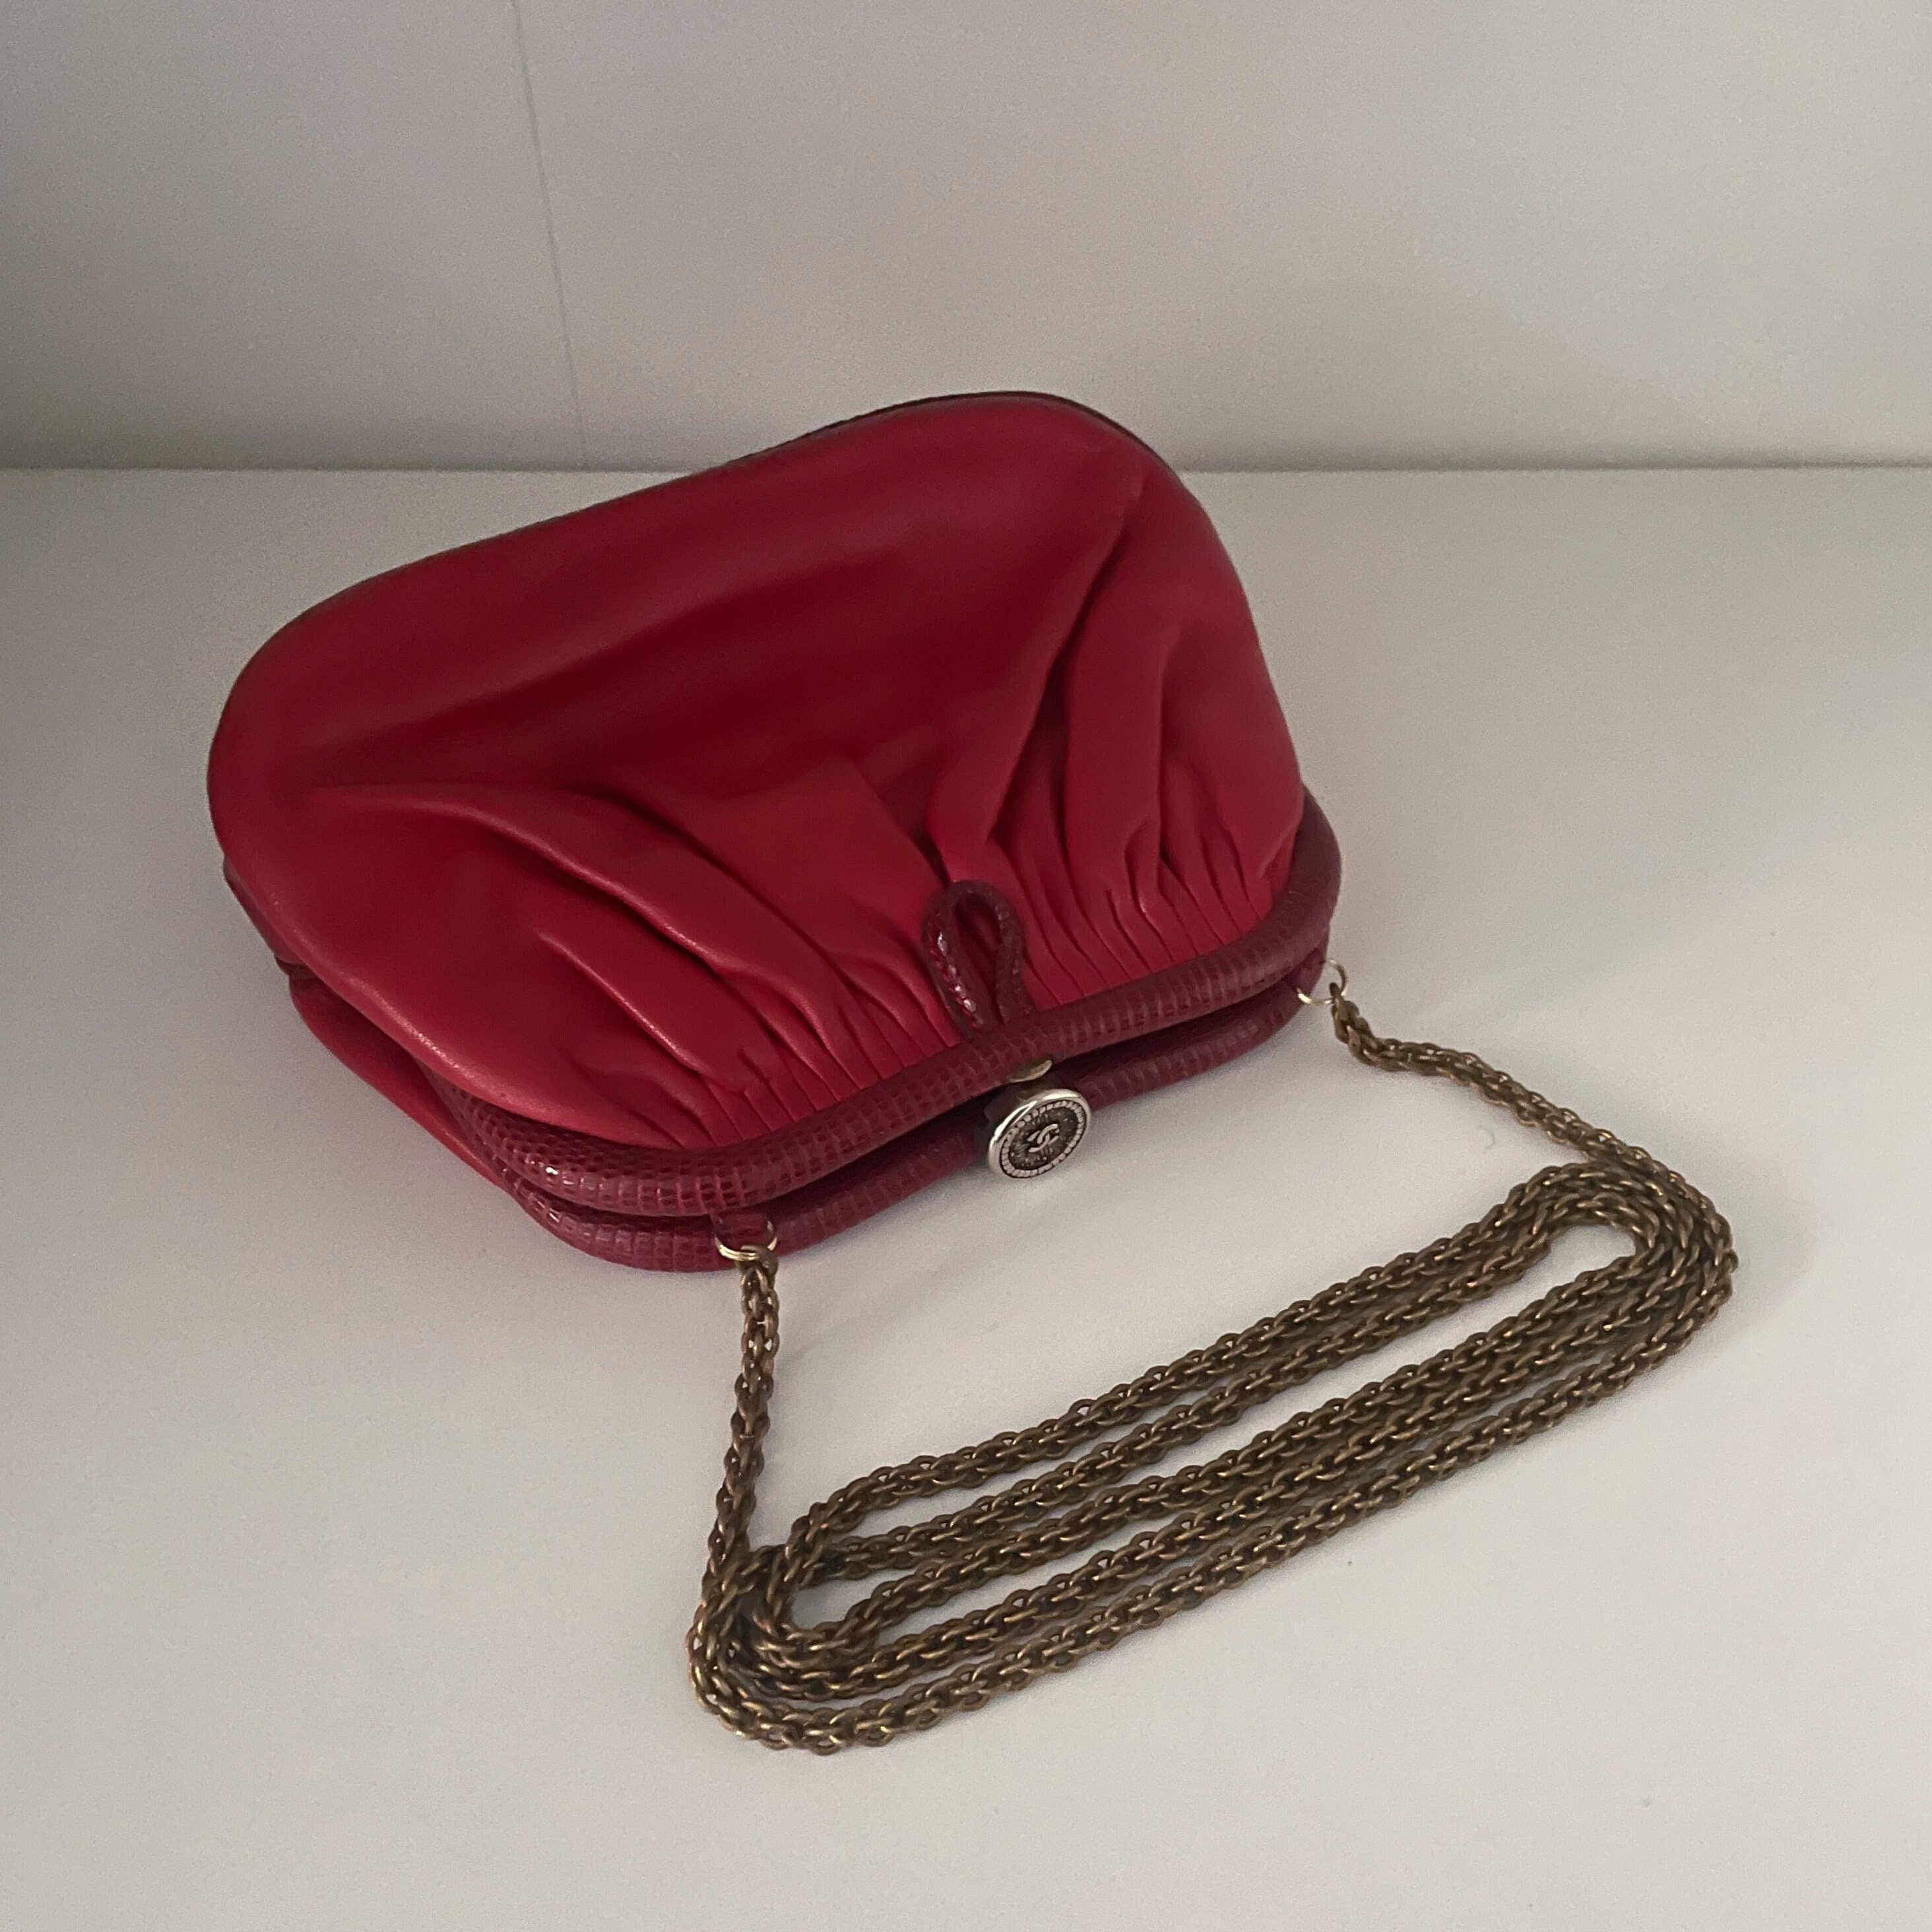 Chanel Red Bag 